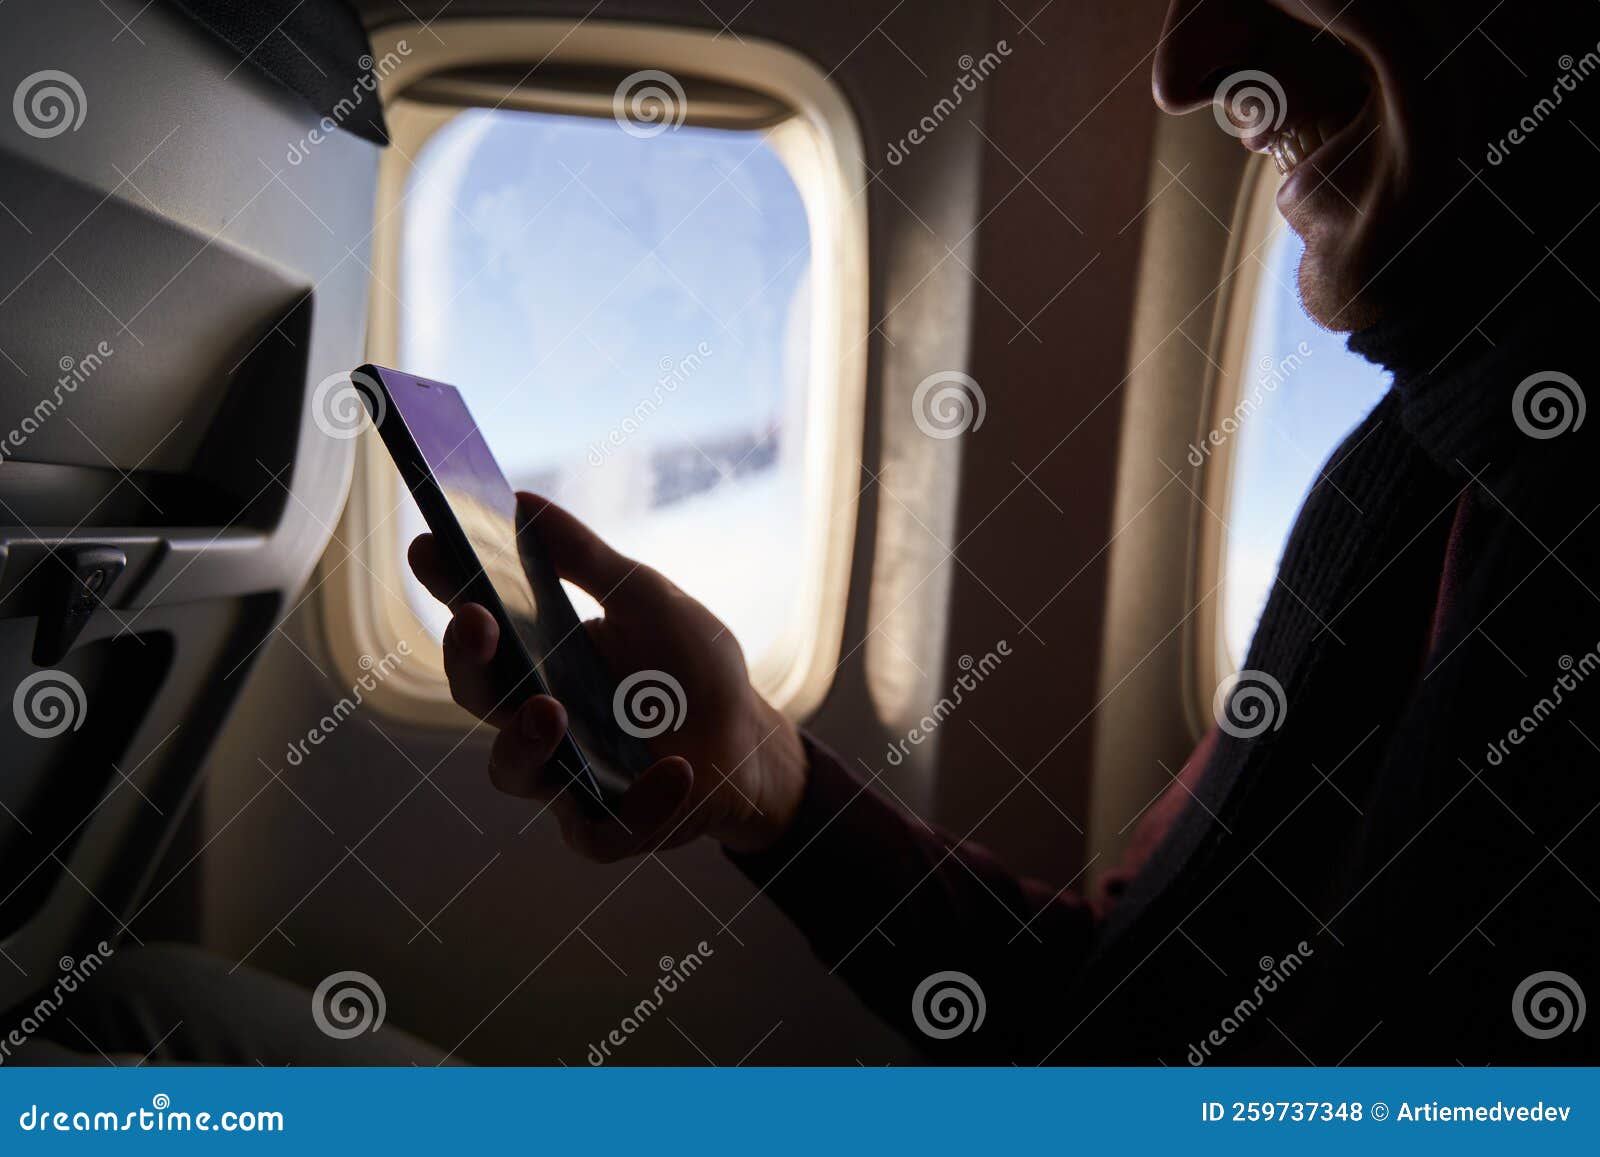 businessman sitting next to airplane window and using smartphone. depersonalized man fly on plane and reading with phone